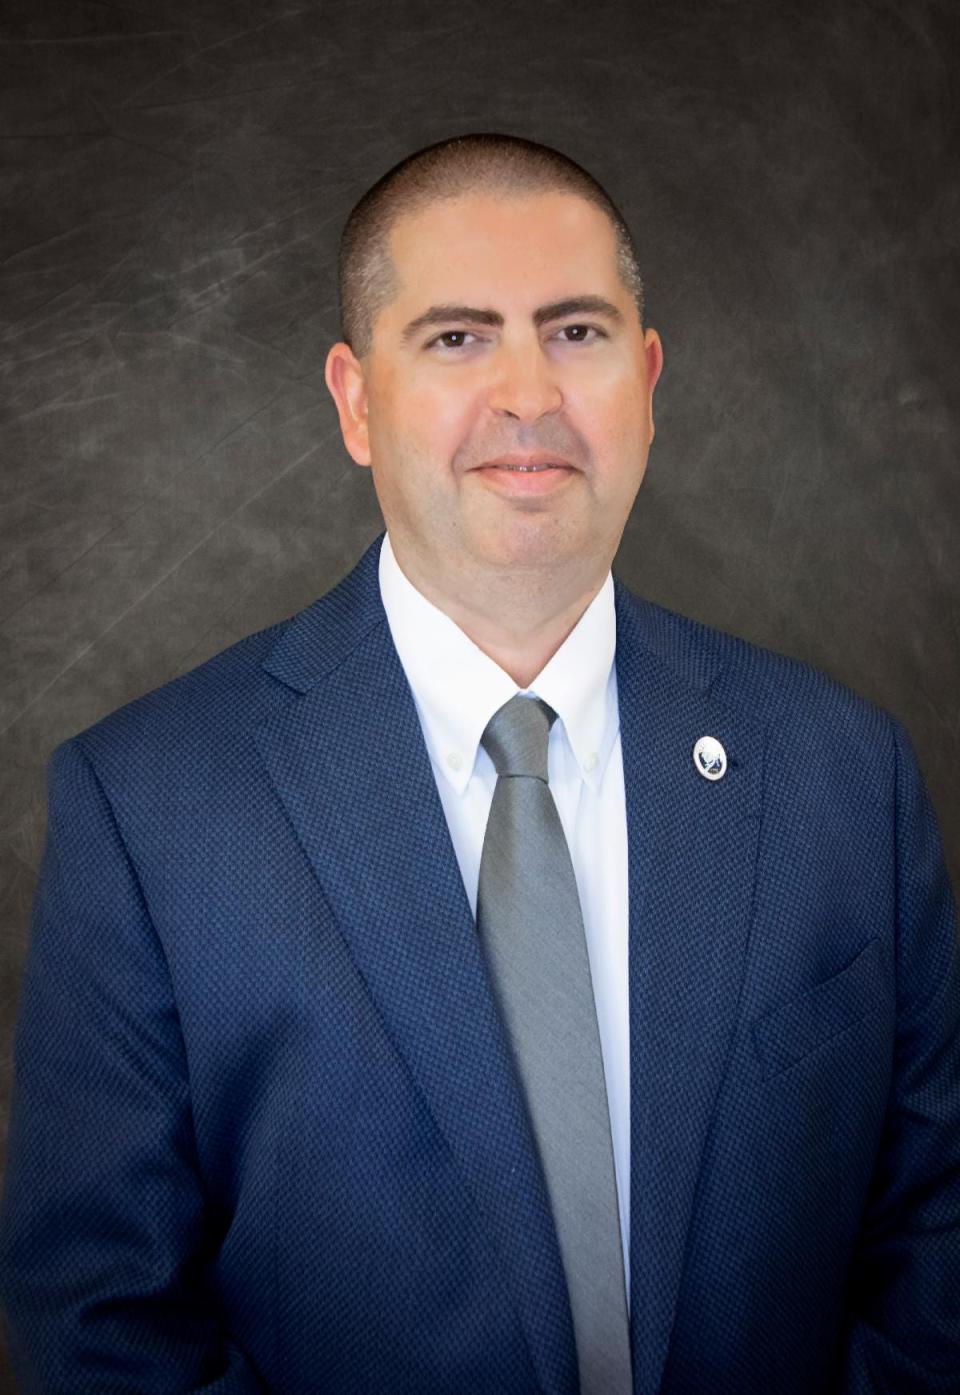 Tom Brown Jr. was recently promoted to Washington County director of emergency management.